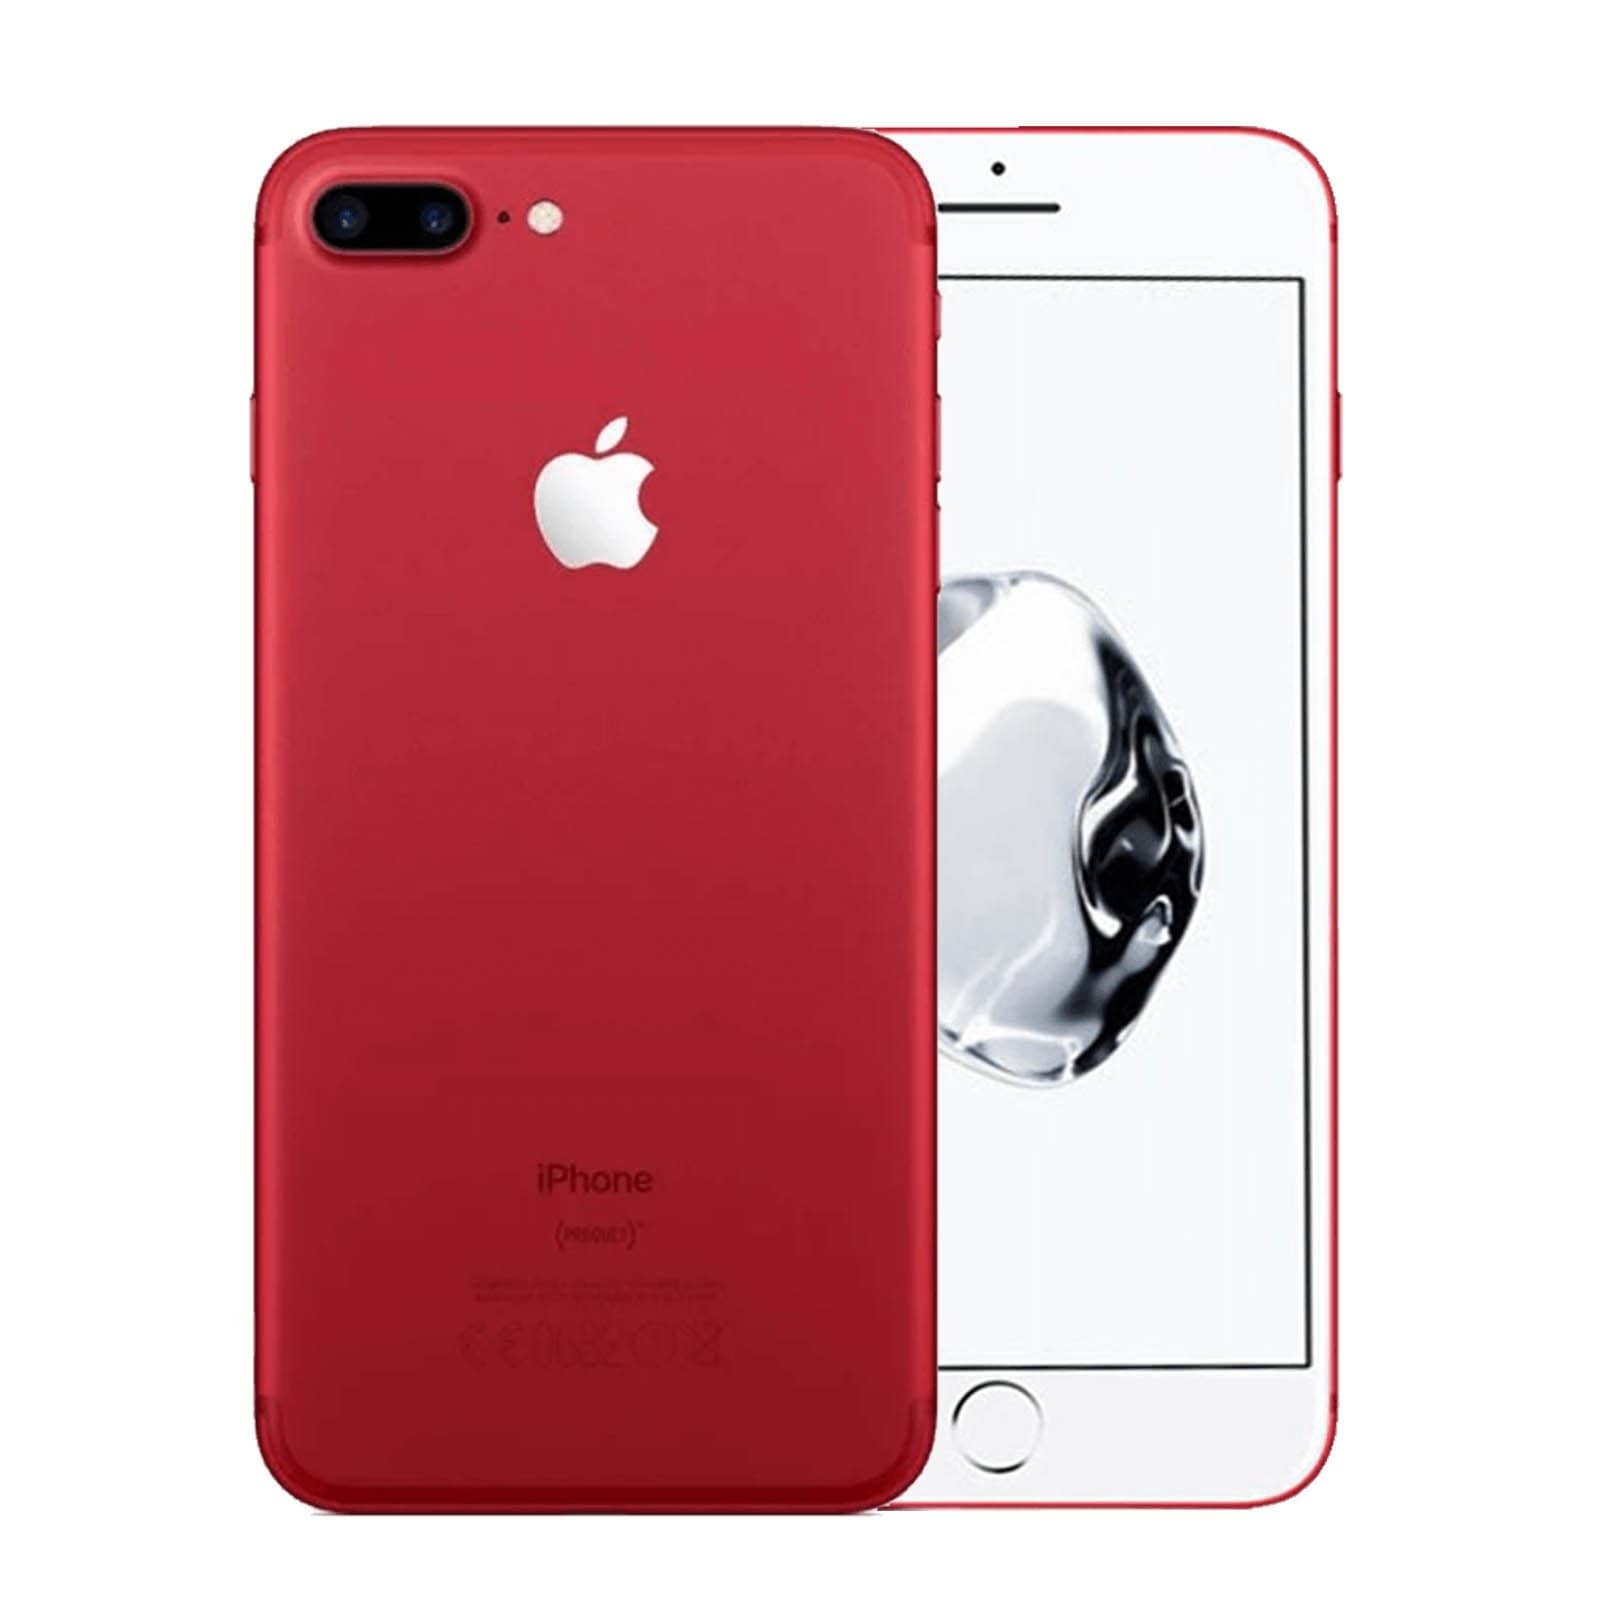 Apple iPhone 7 Plus 256GB Product Red Very Good - Unlocked 256GB Product Red Very Good